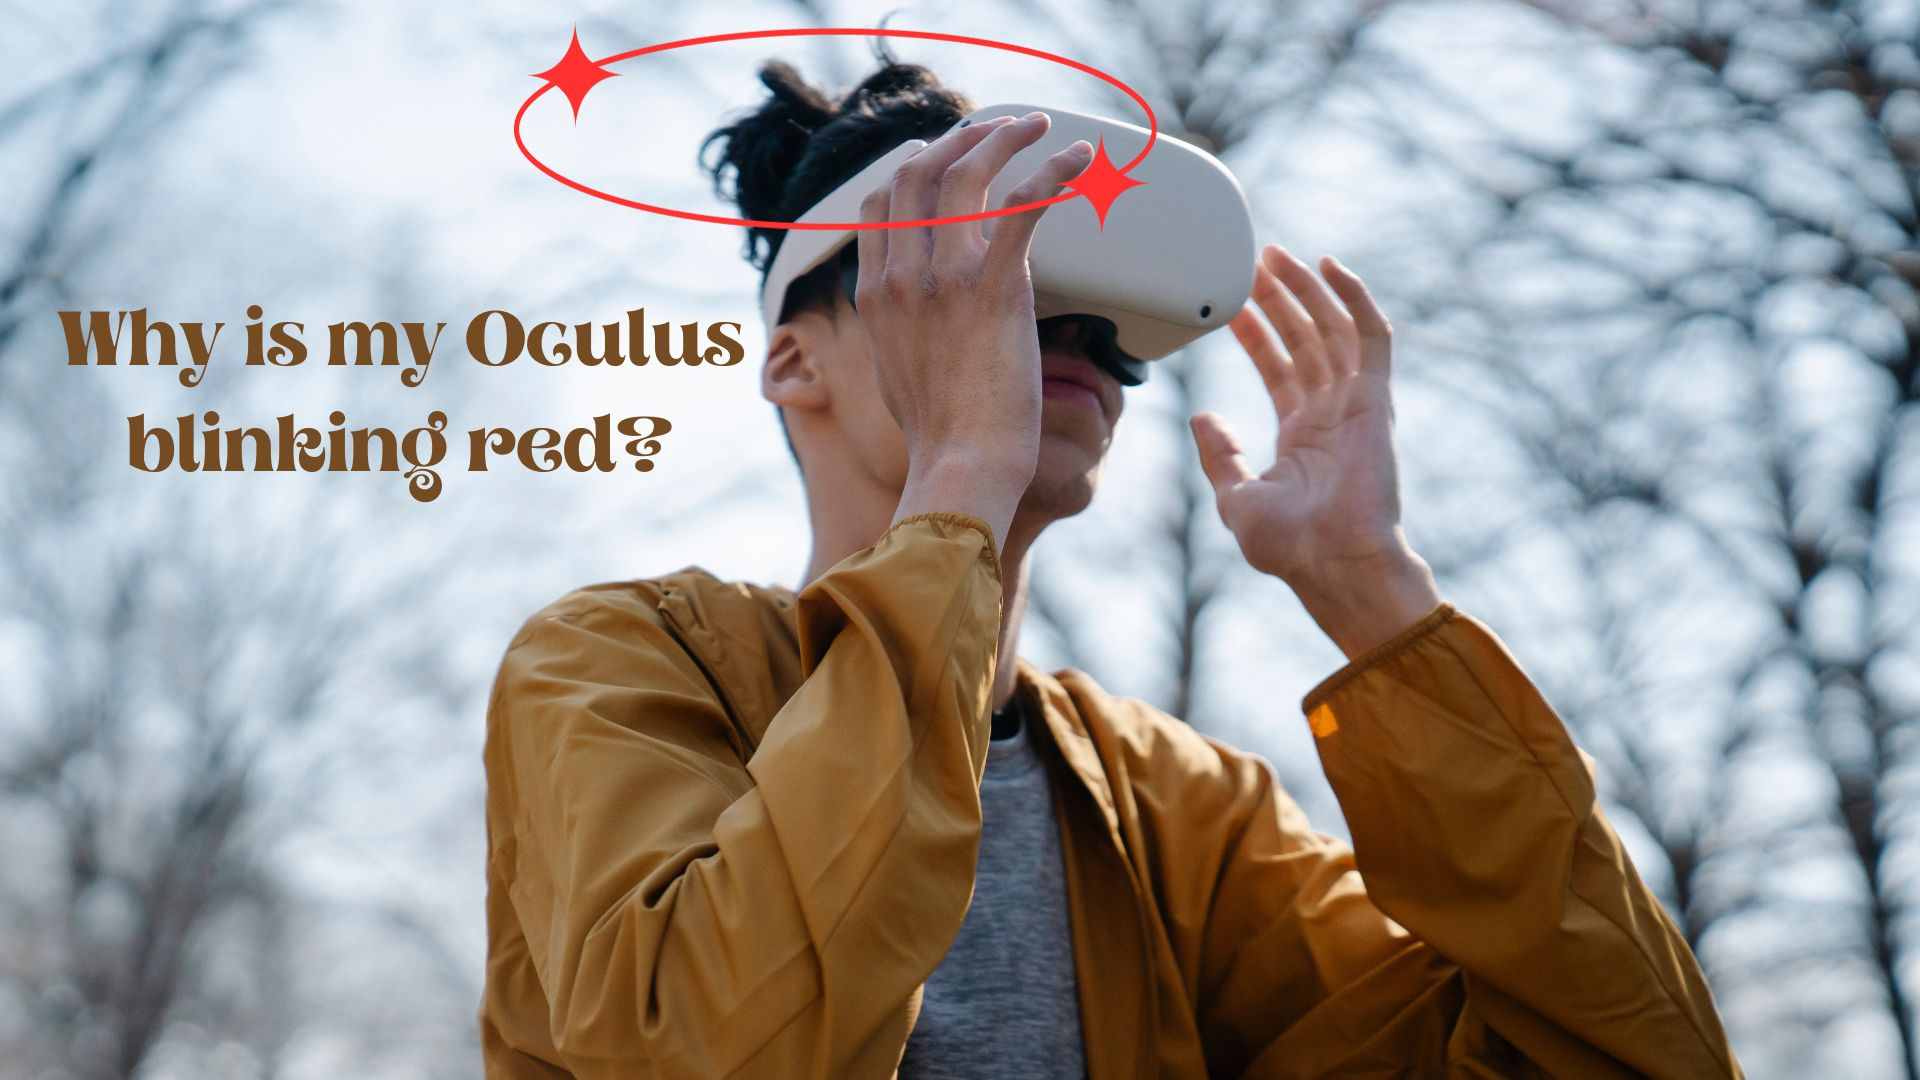 Why is my Oculus blinking red? Reasons and Solutions